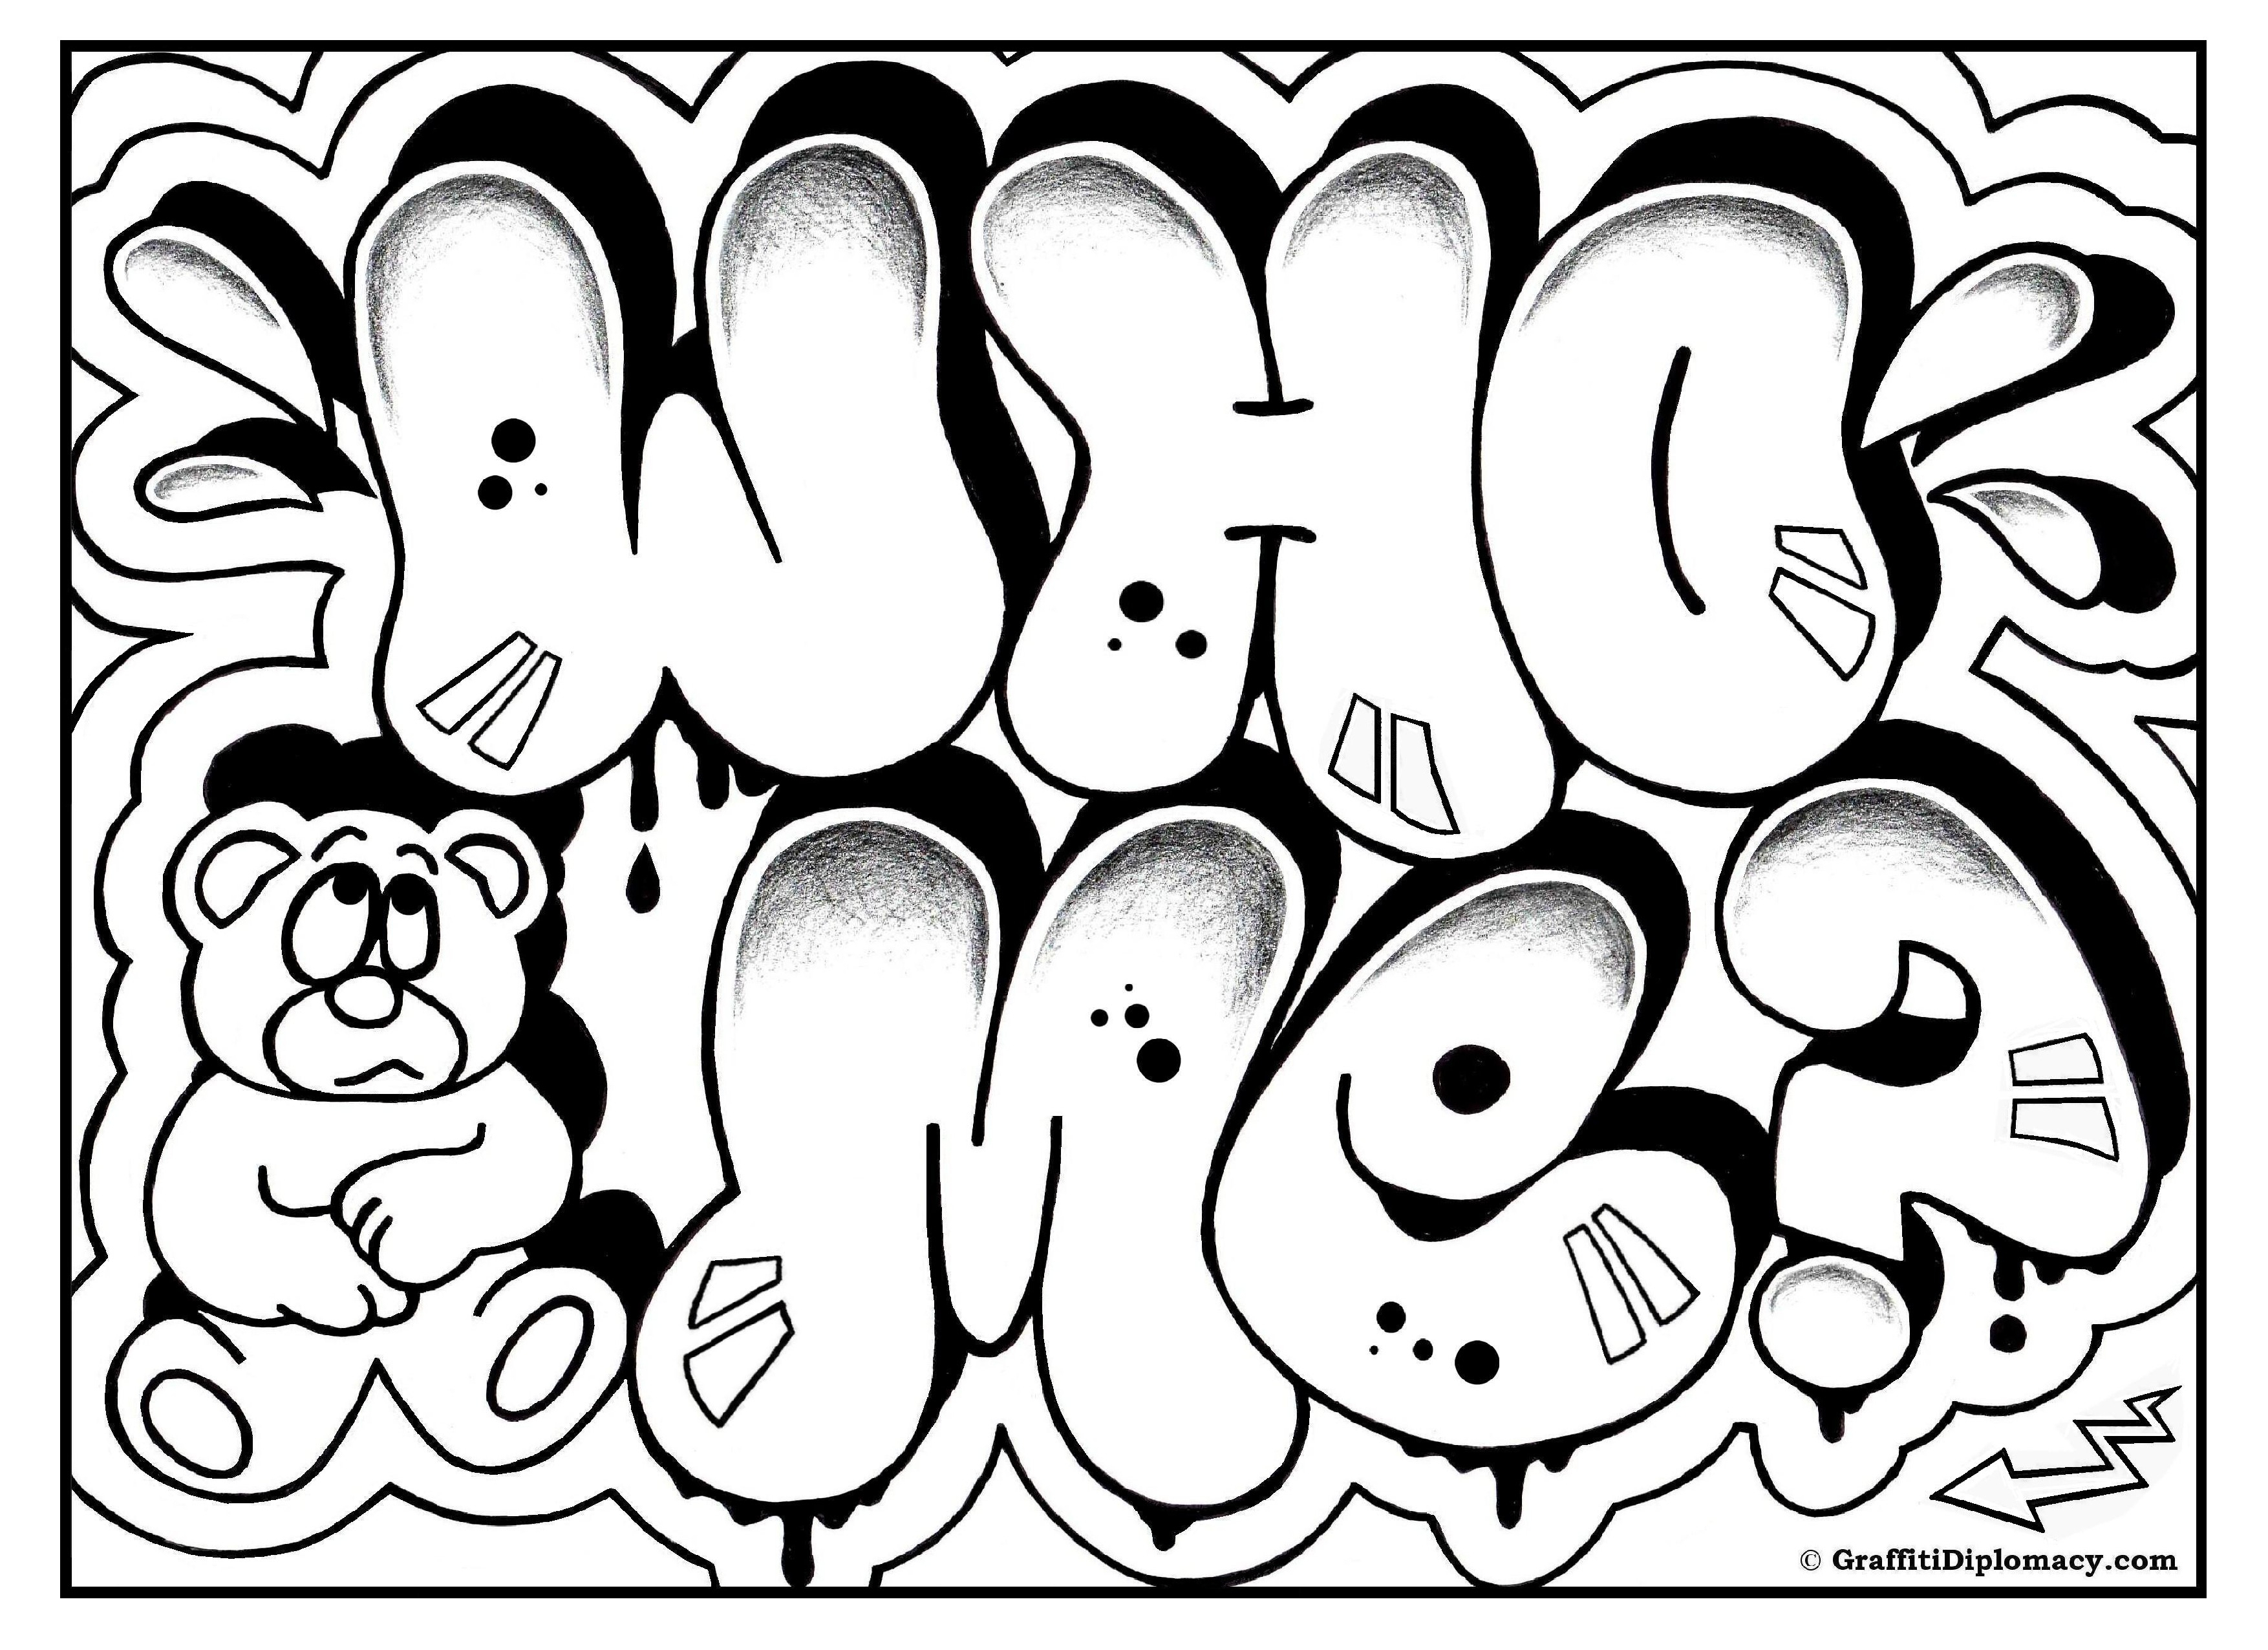 Graffiti Coloring Pages For Teenagers at GetDrawings Free download